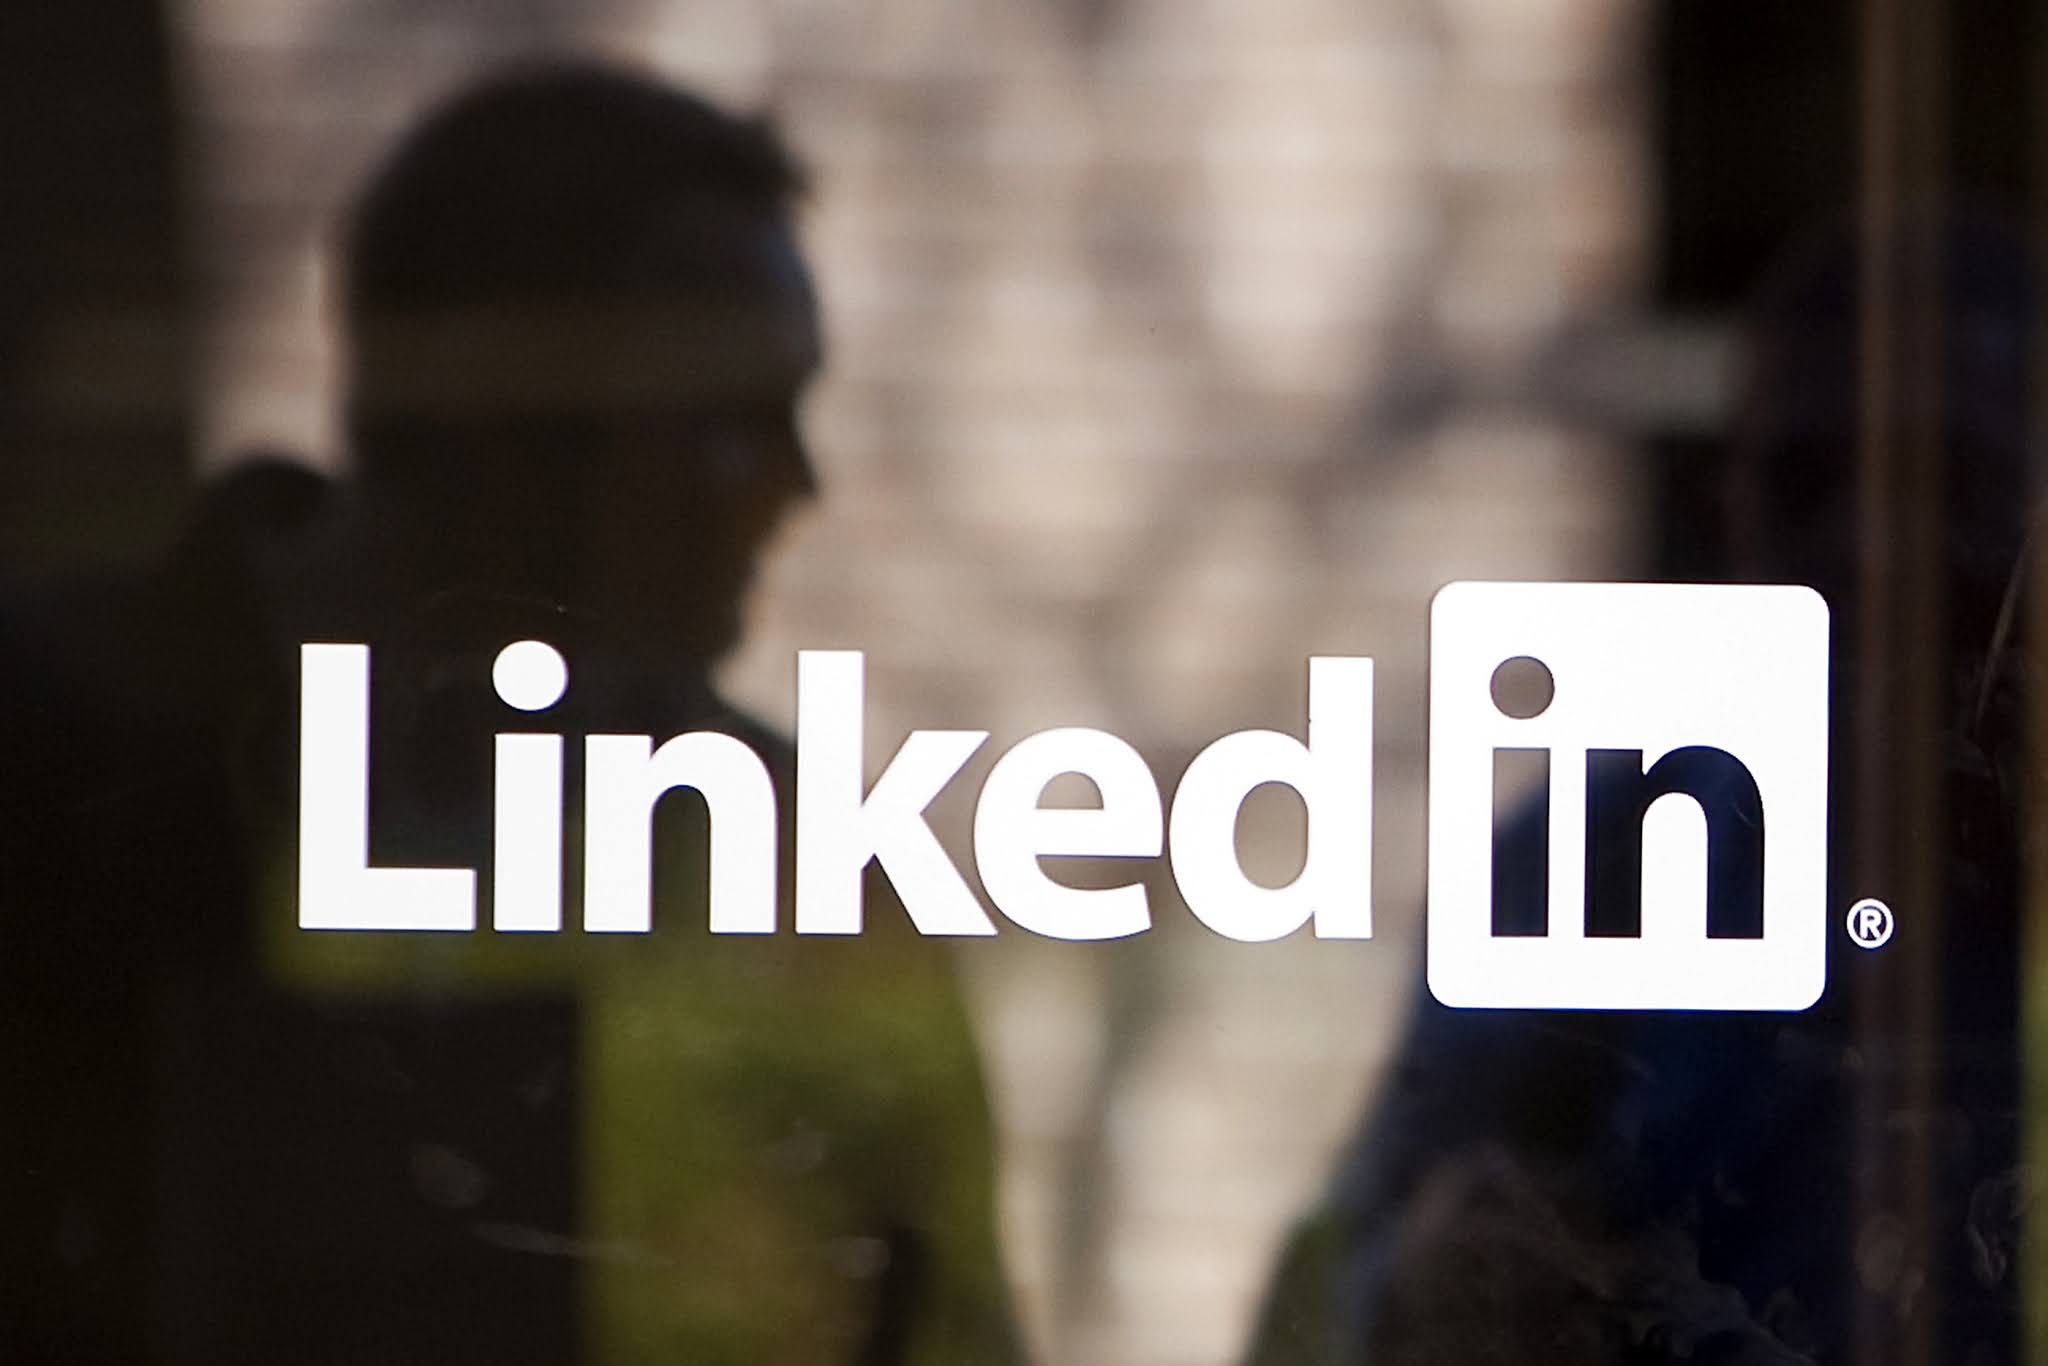 LinkedIn has finally learned that blindly following trends does not always yield positive results